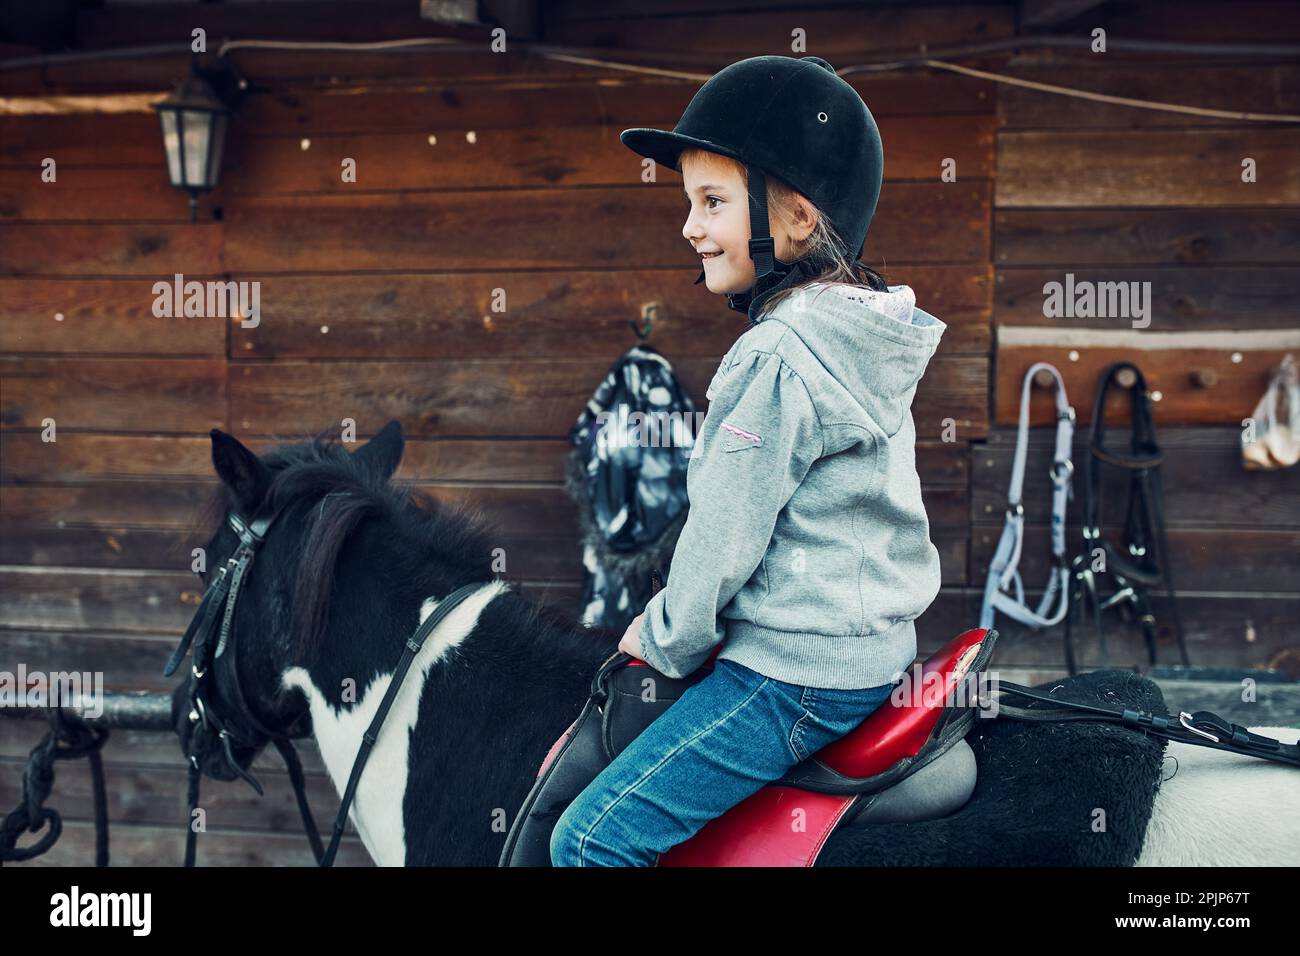 Little smiling girl learning horseback riding. 5-6 years old equestrian in helmet having fun riding a horse Stock Photo